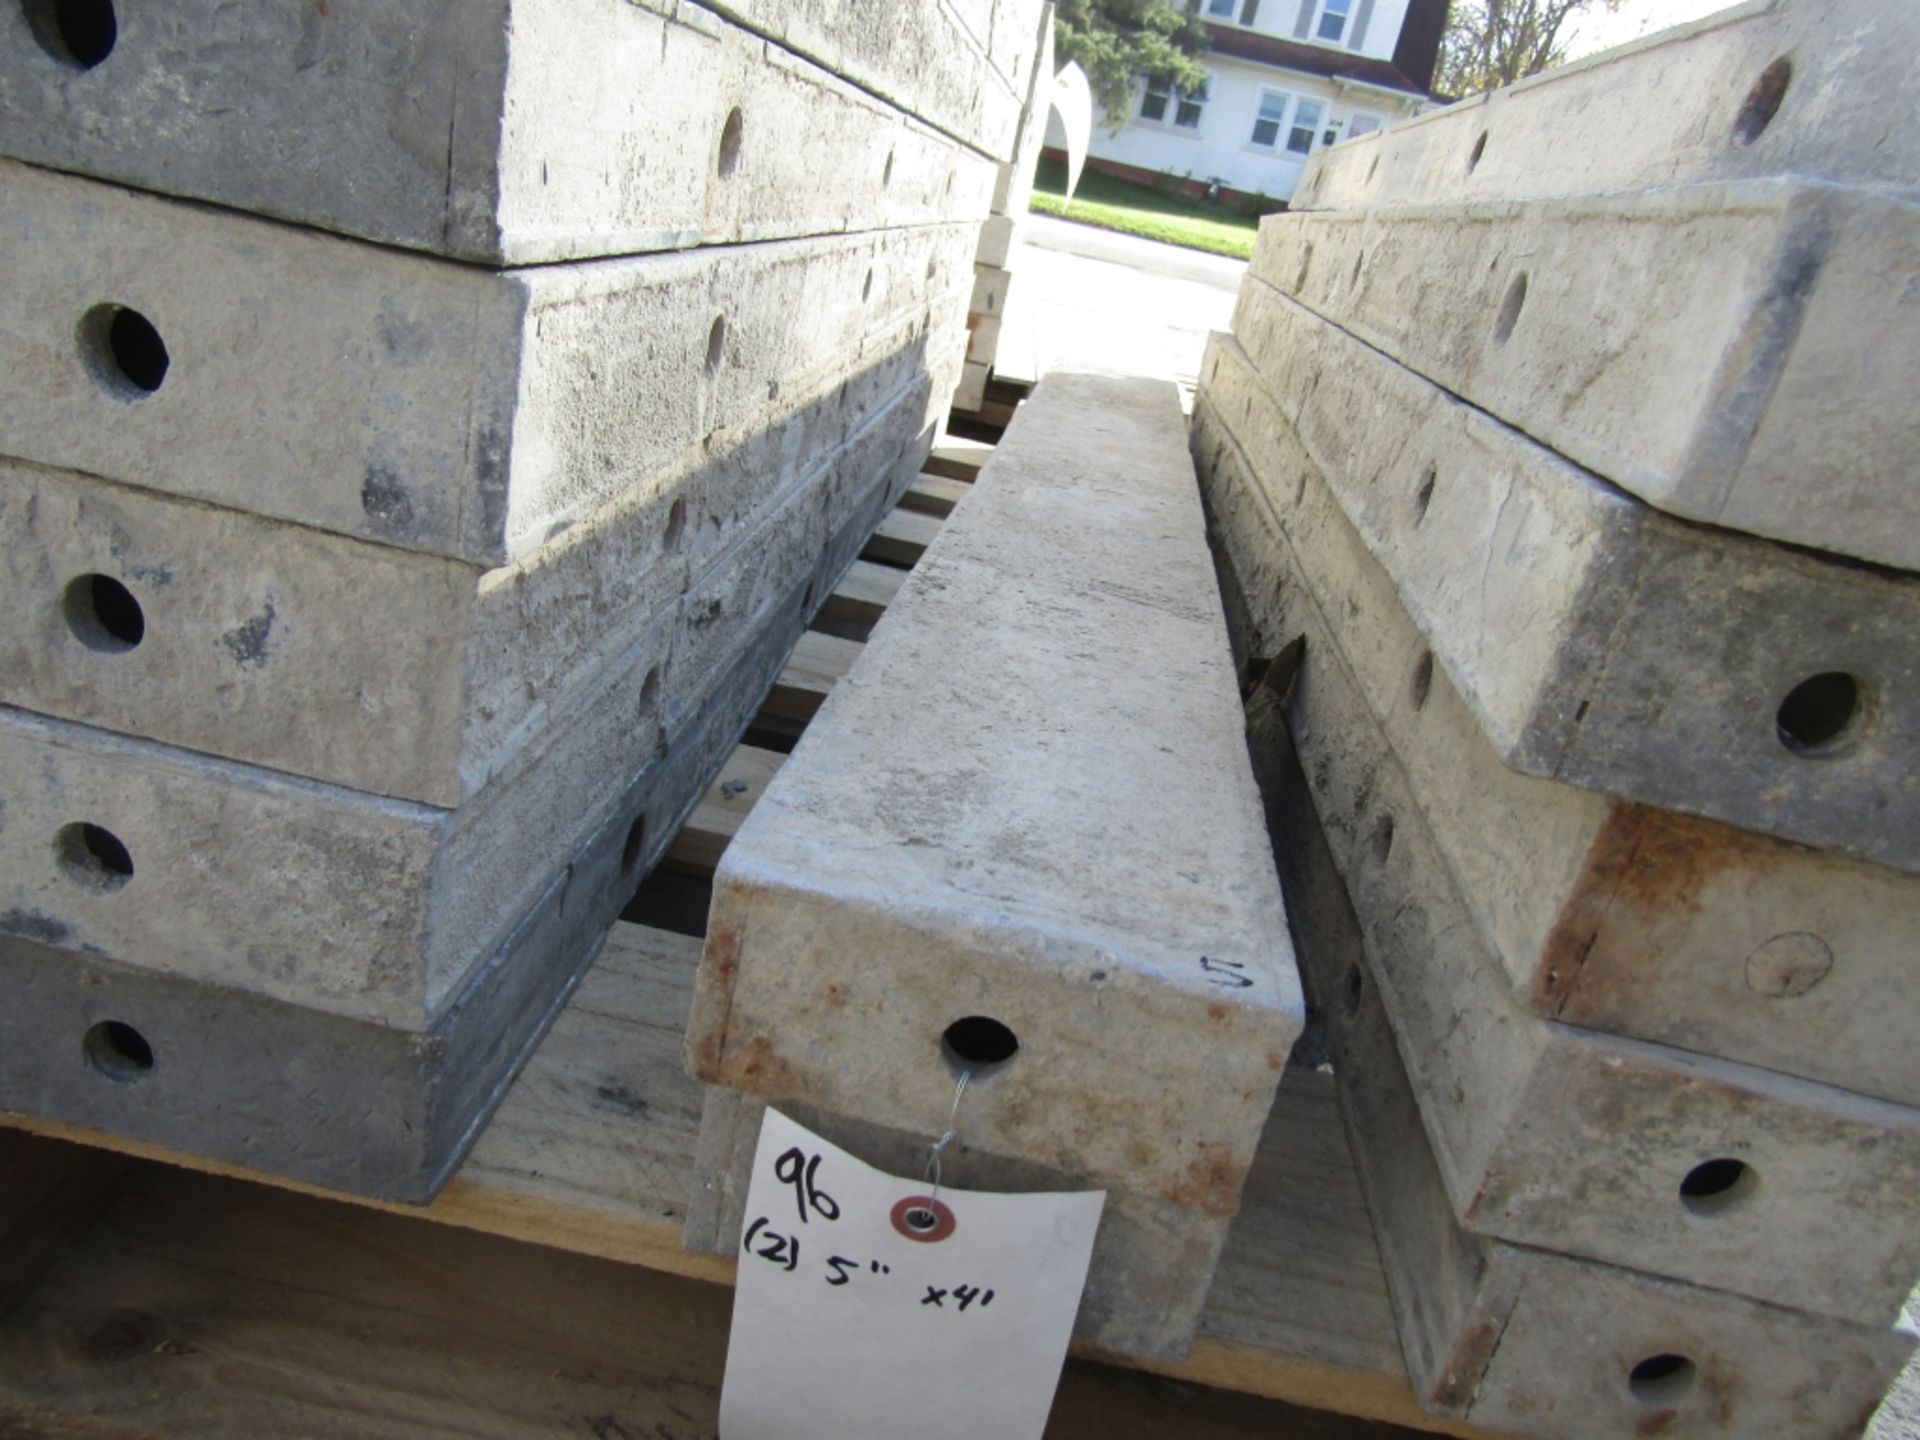 (2) 5" x 4' Durand Concrete Forms, Smooth 6-12 Hole Pattern, Located in Mt. Pleasant, IA